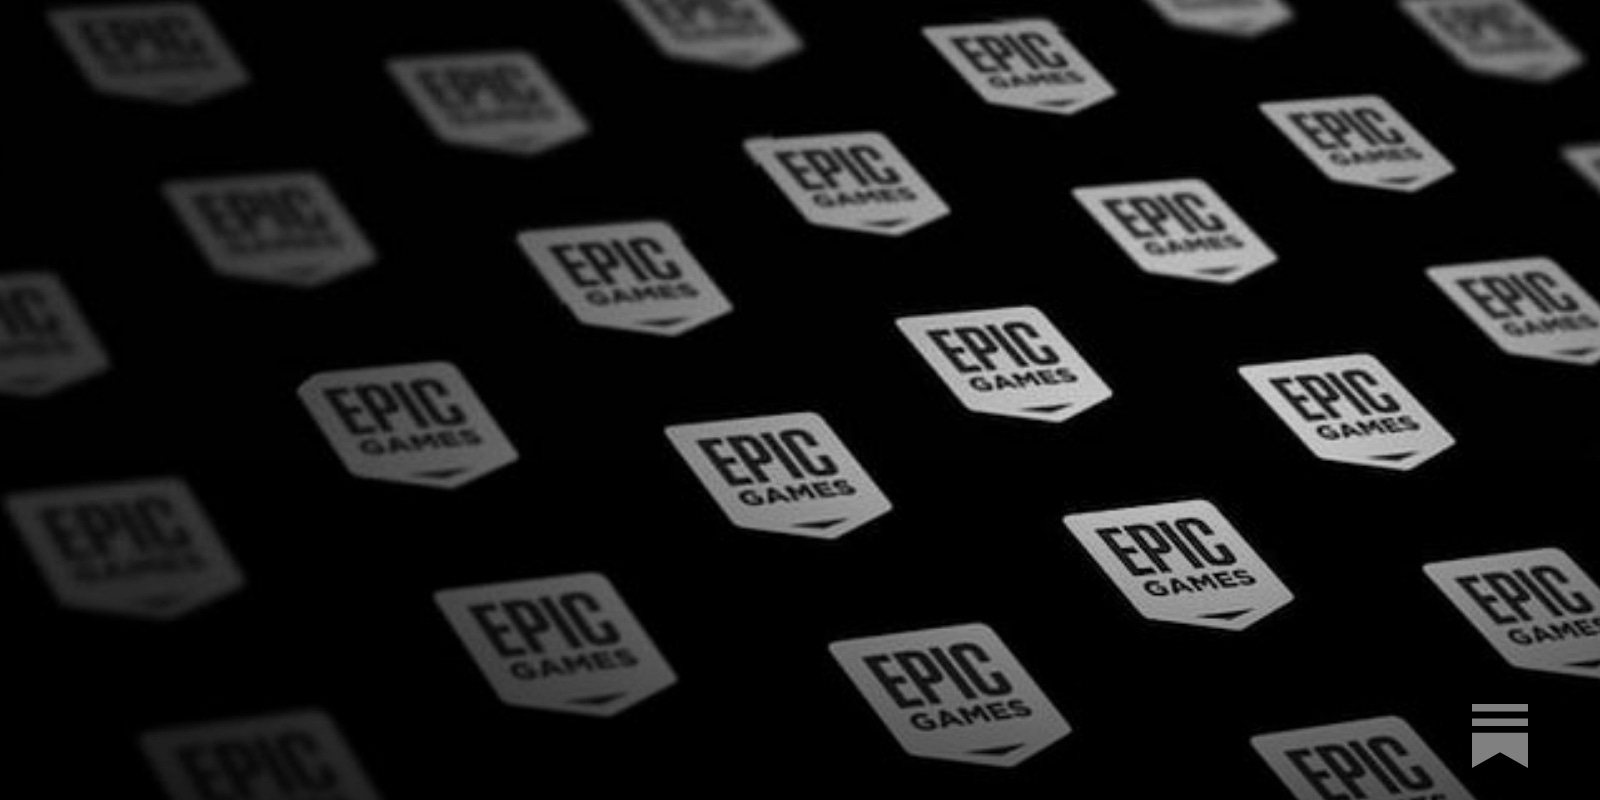 Epic Games wants devs to bring their back catalogs to its store